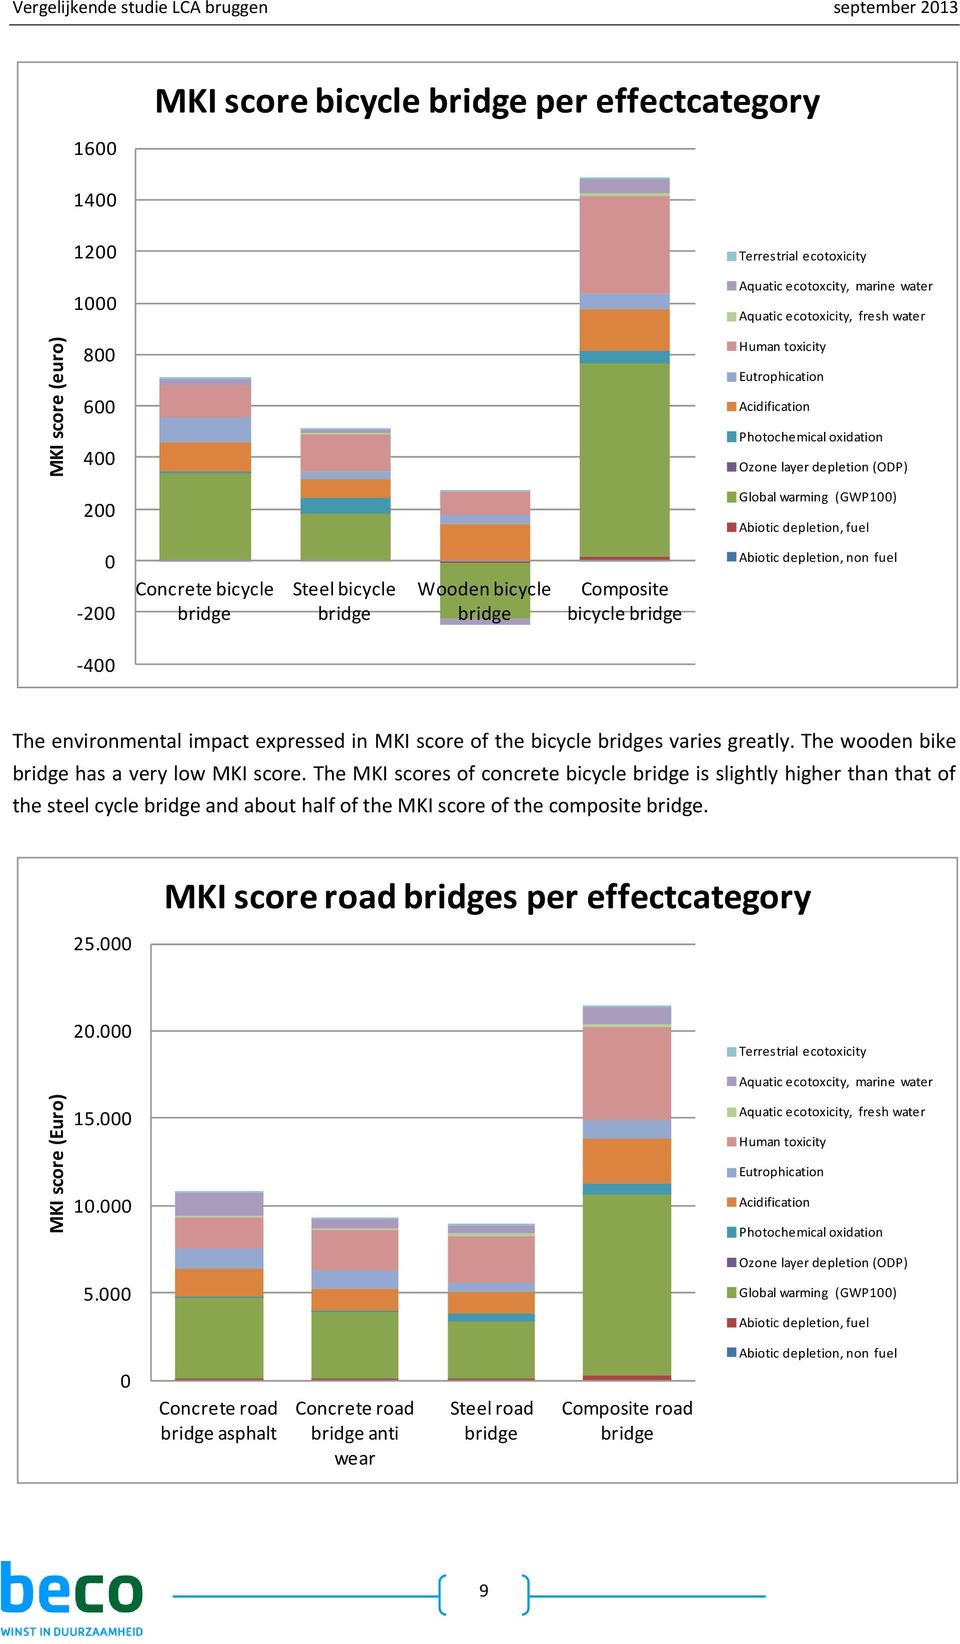 Abiotic depletion, non fuel -200 Concrete bicycle bridge Steel bicycle bridge Wooden bicycle bridge Composite bicycle bridge -400 The environmental impact expressed in MKI score of the bicycle